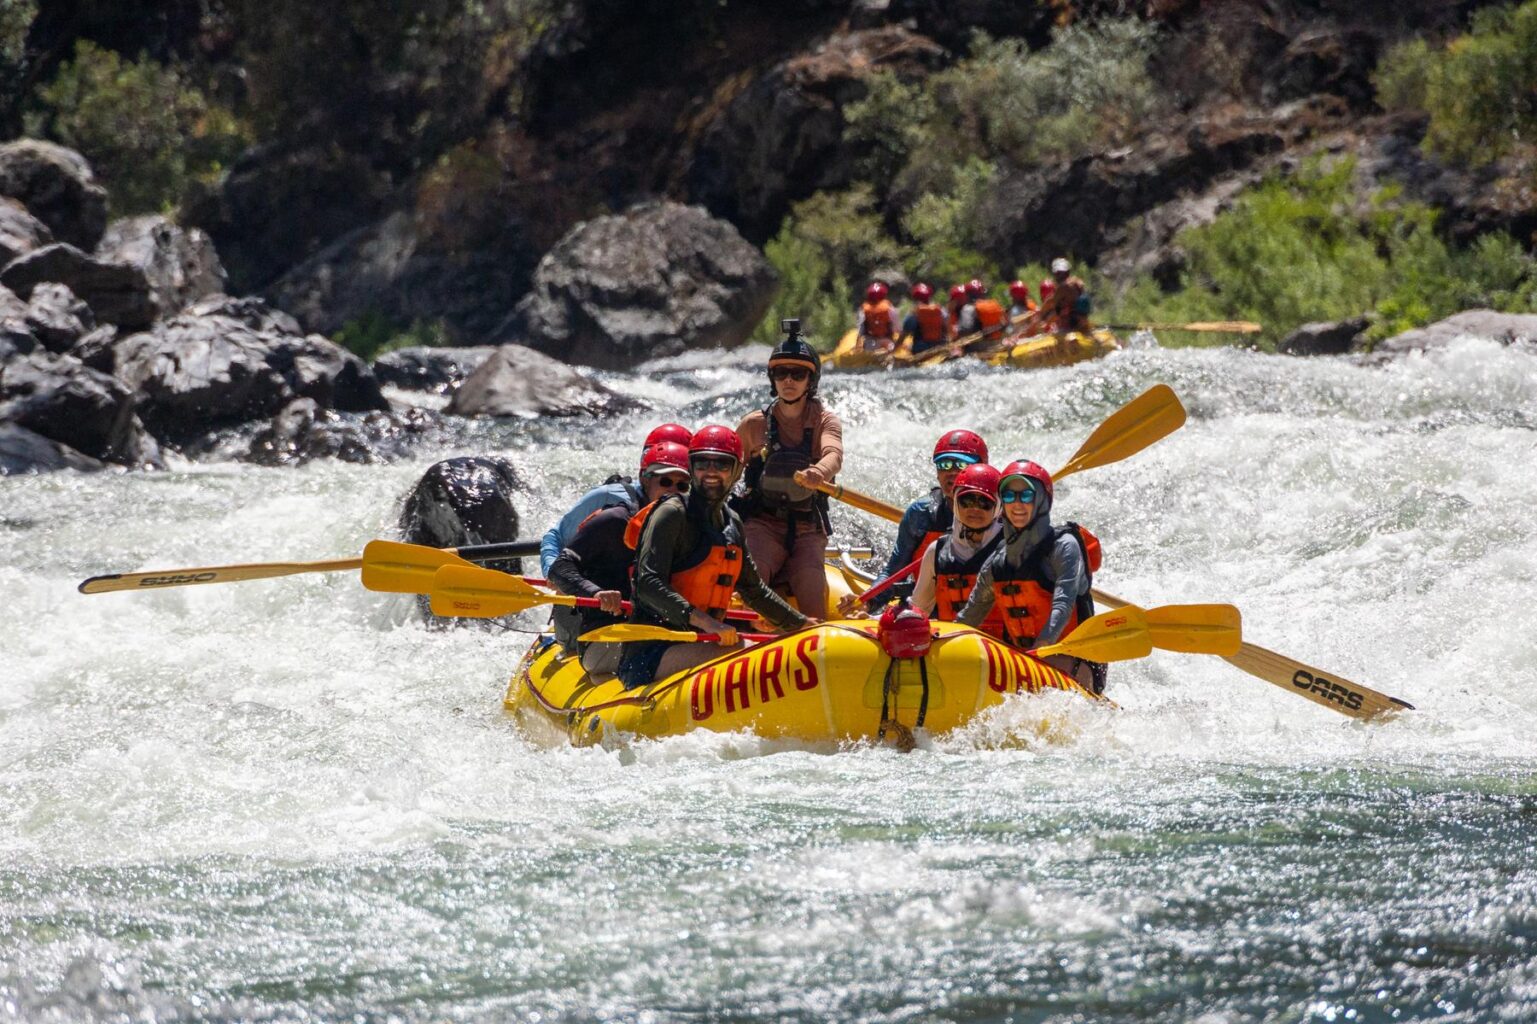 Whitewater rafting on the Tuolumne during an OARS two-day trip